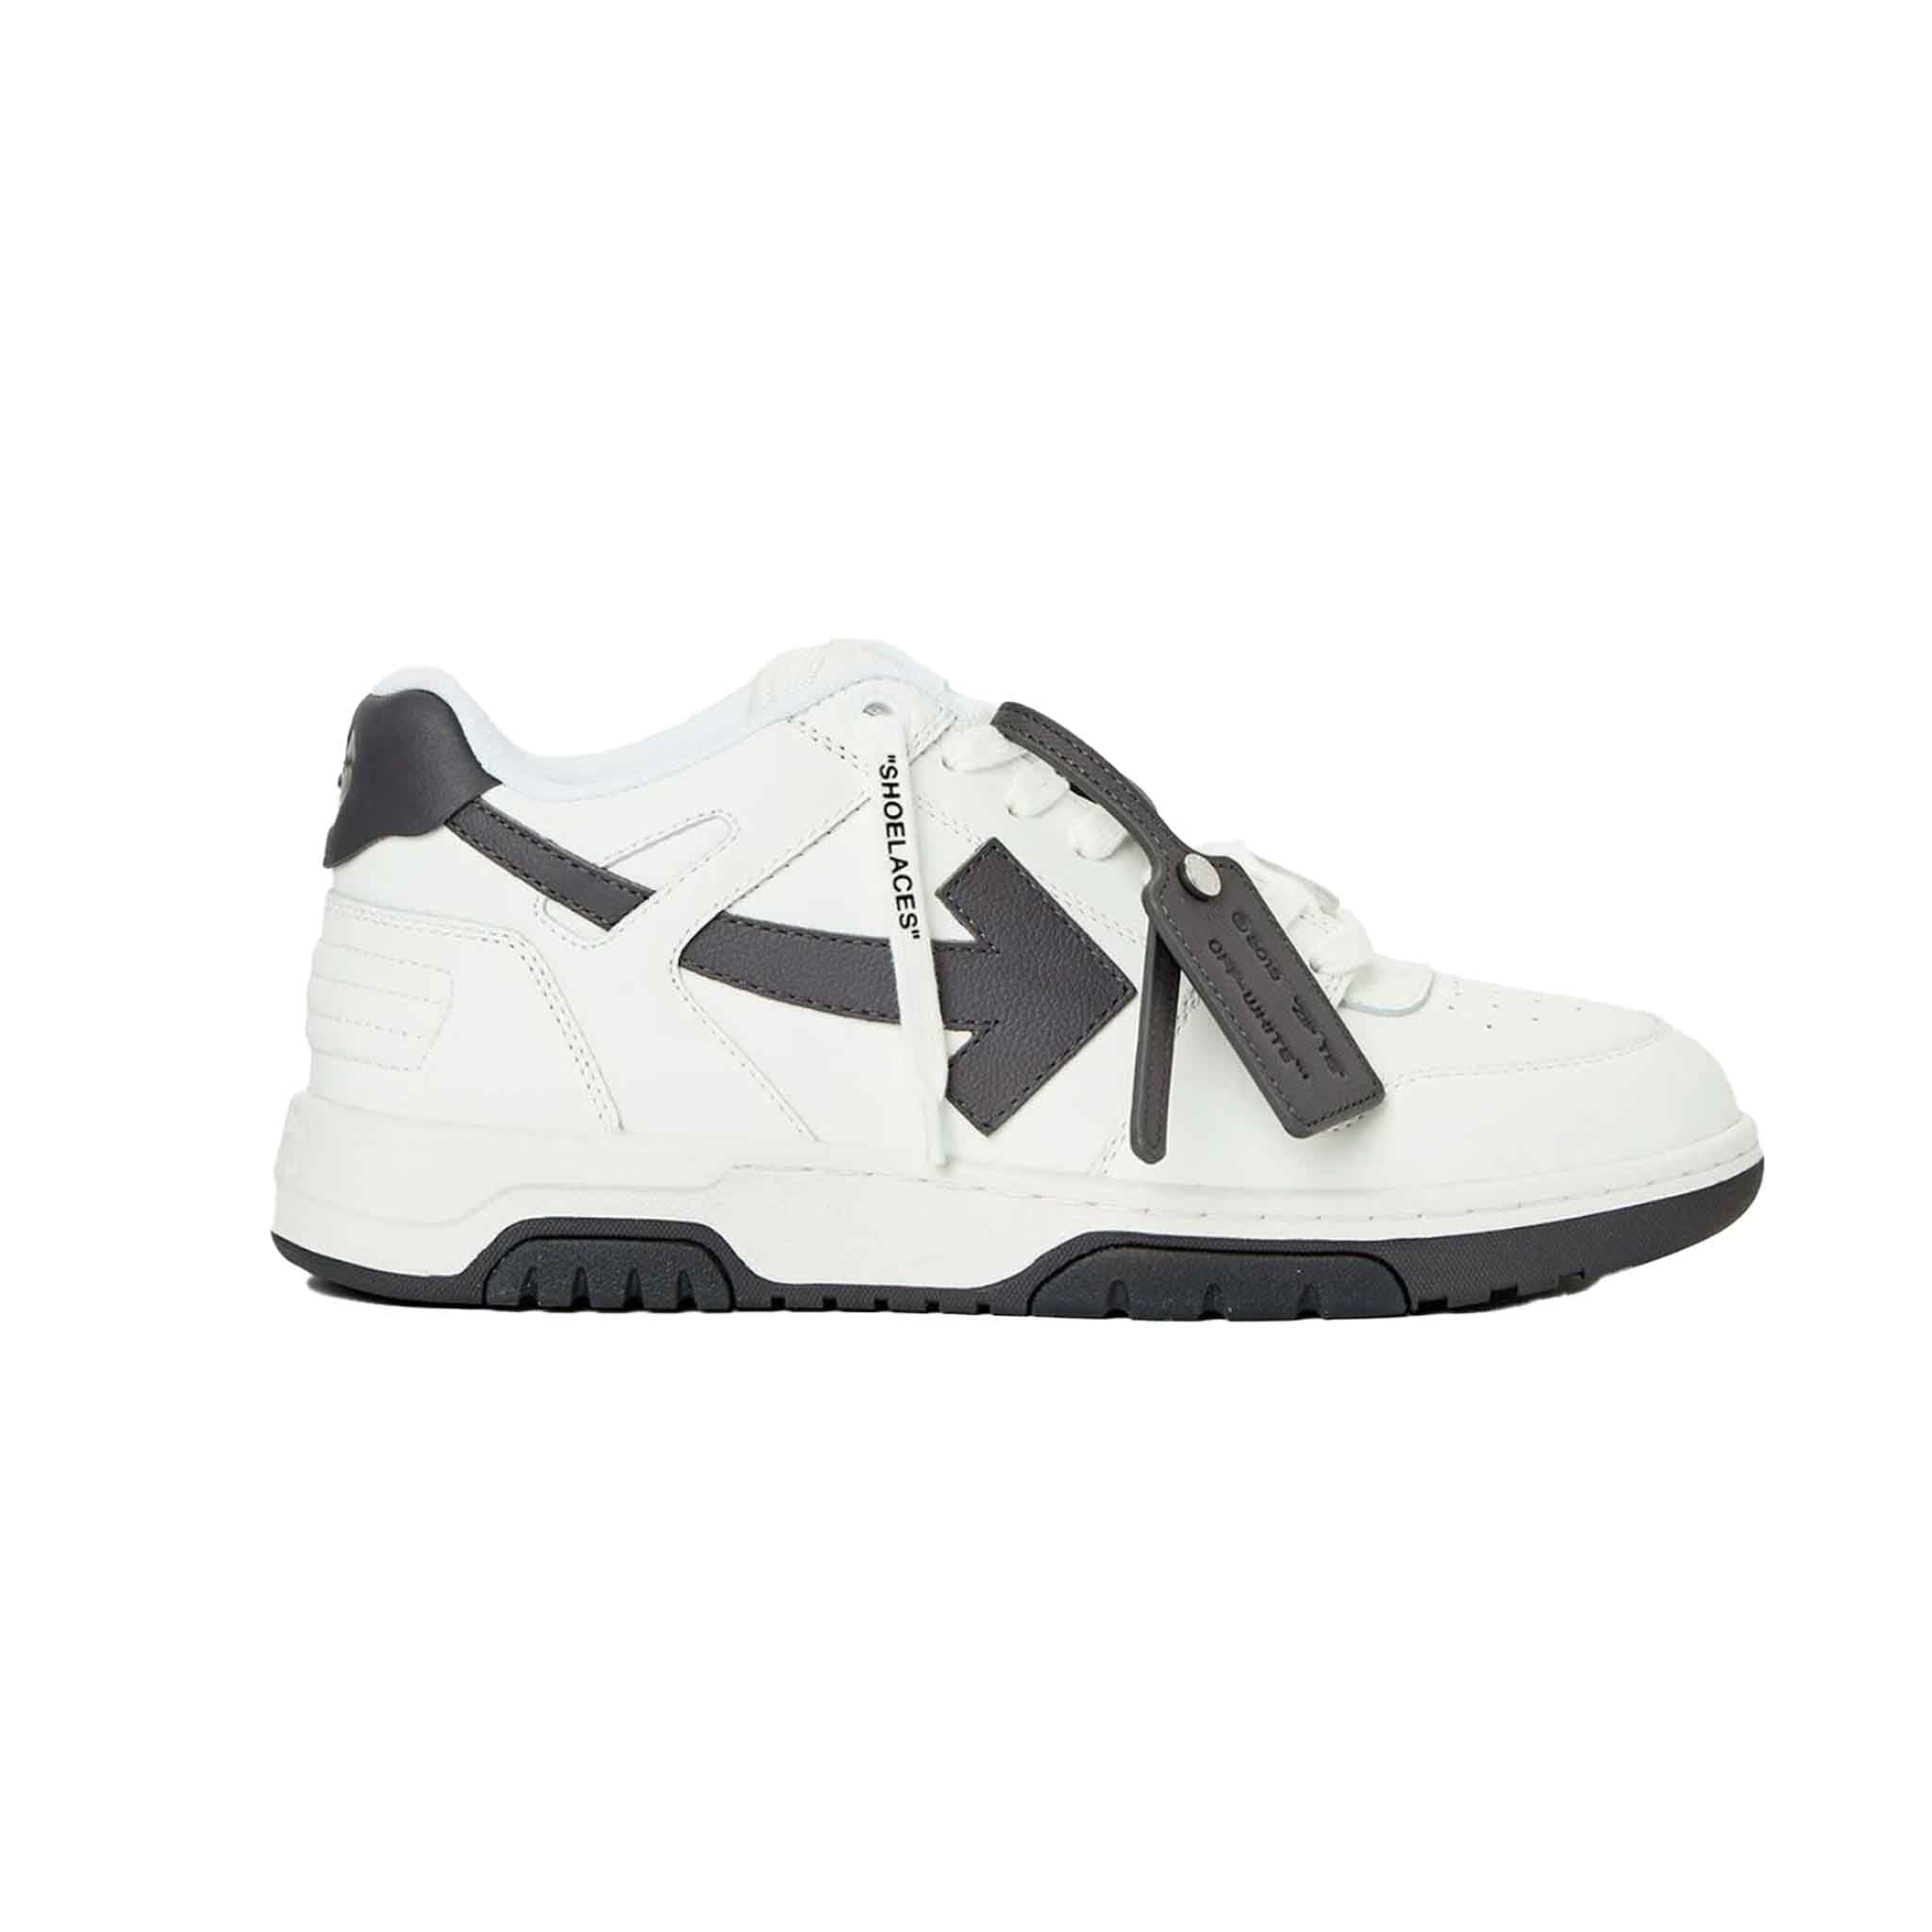 OFF-WHITE Out Of Office Sneaker Calf Leather in White/Dark Grey